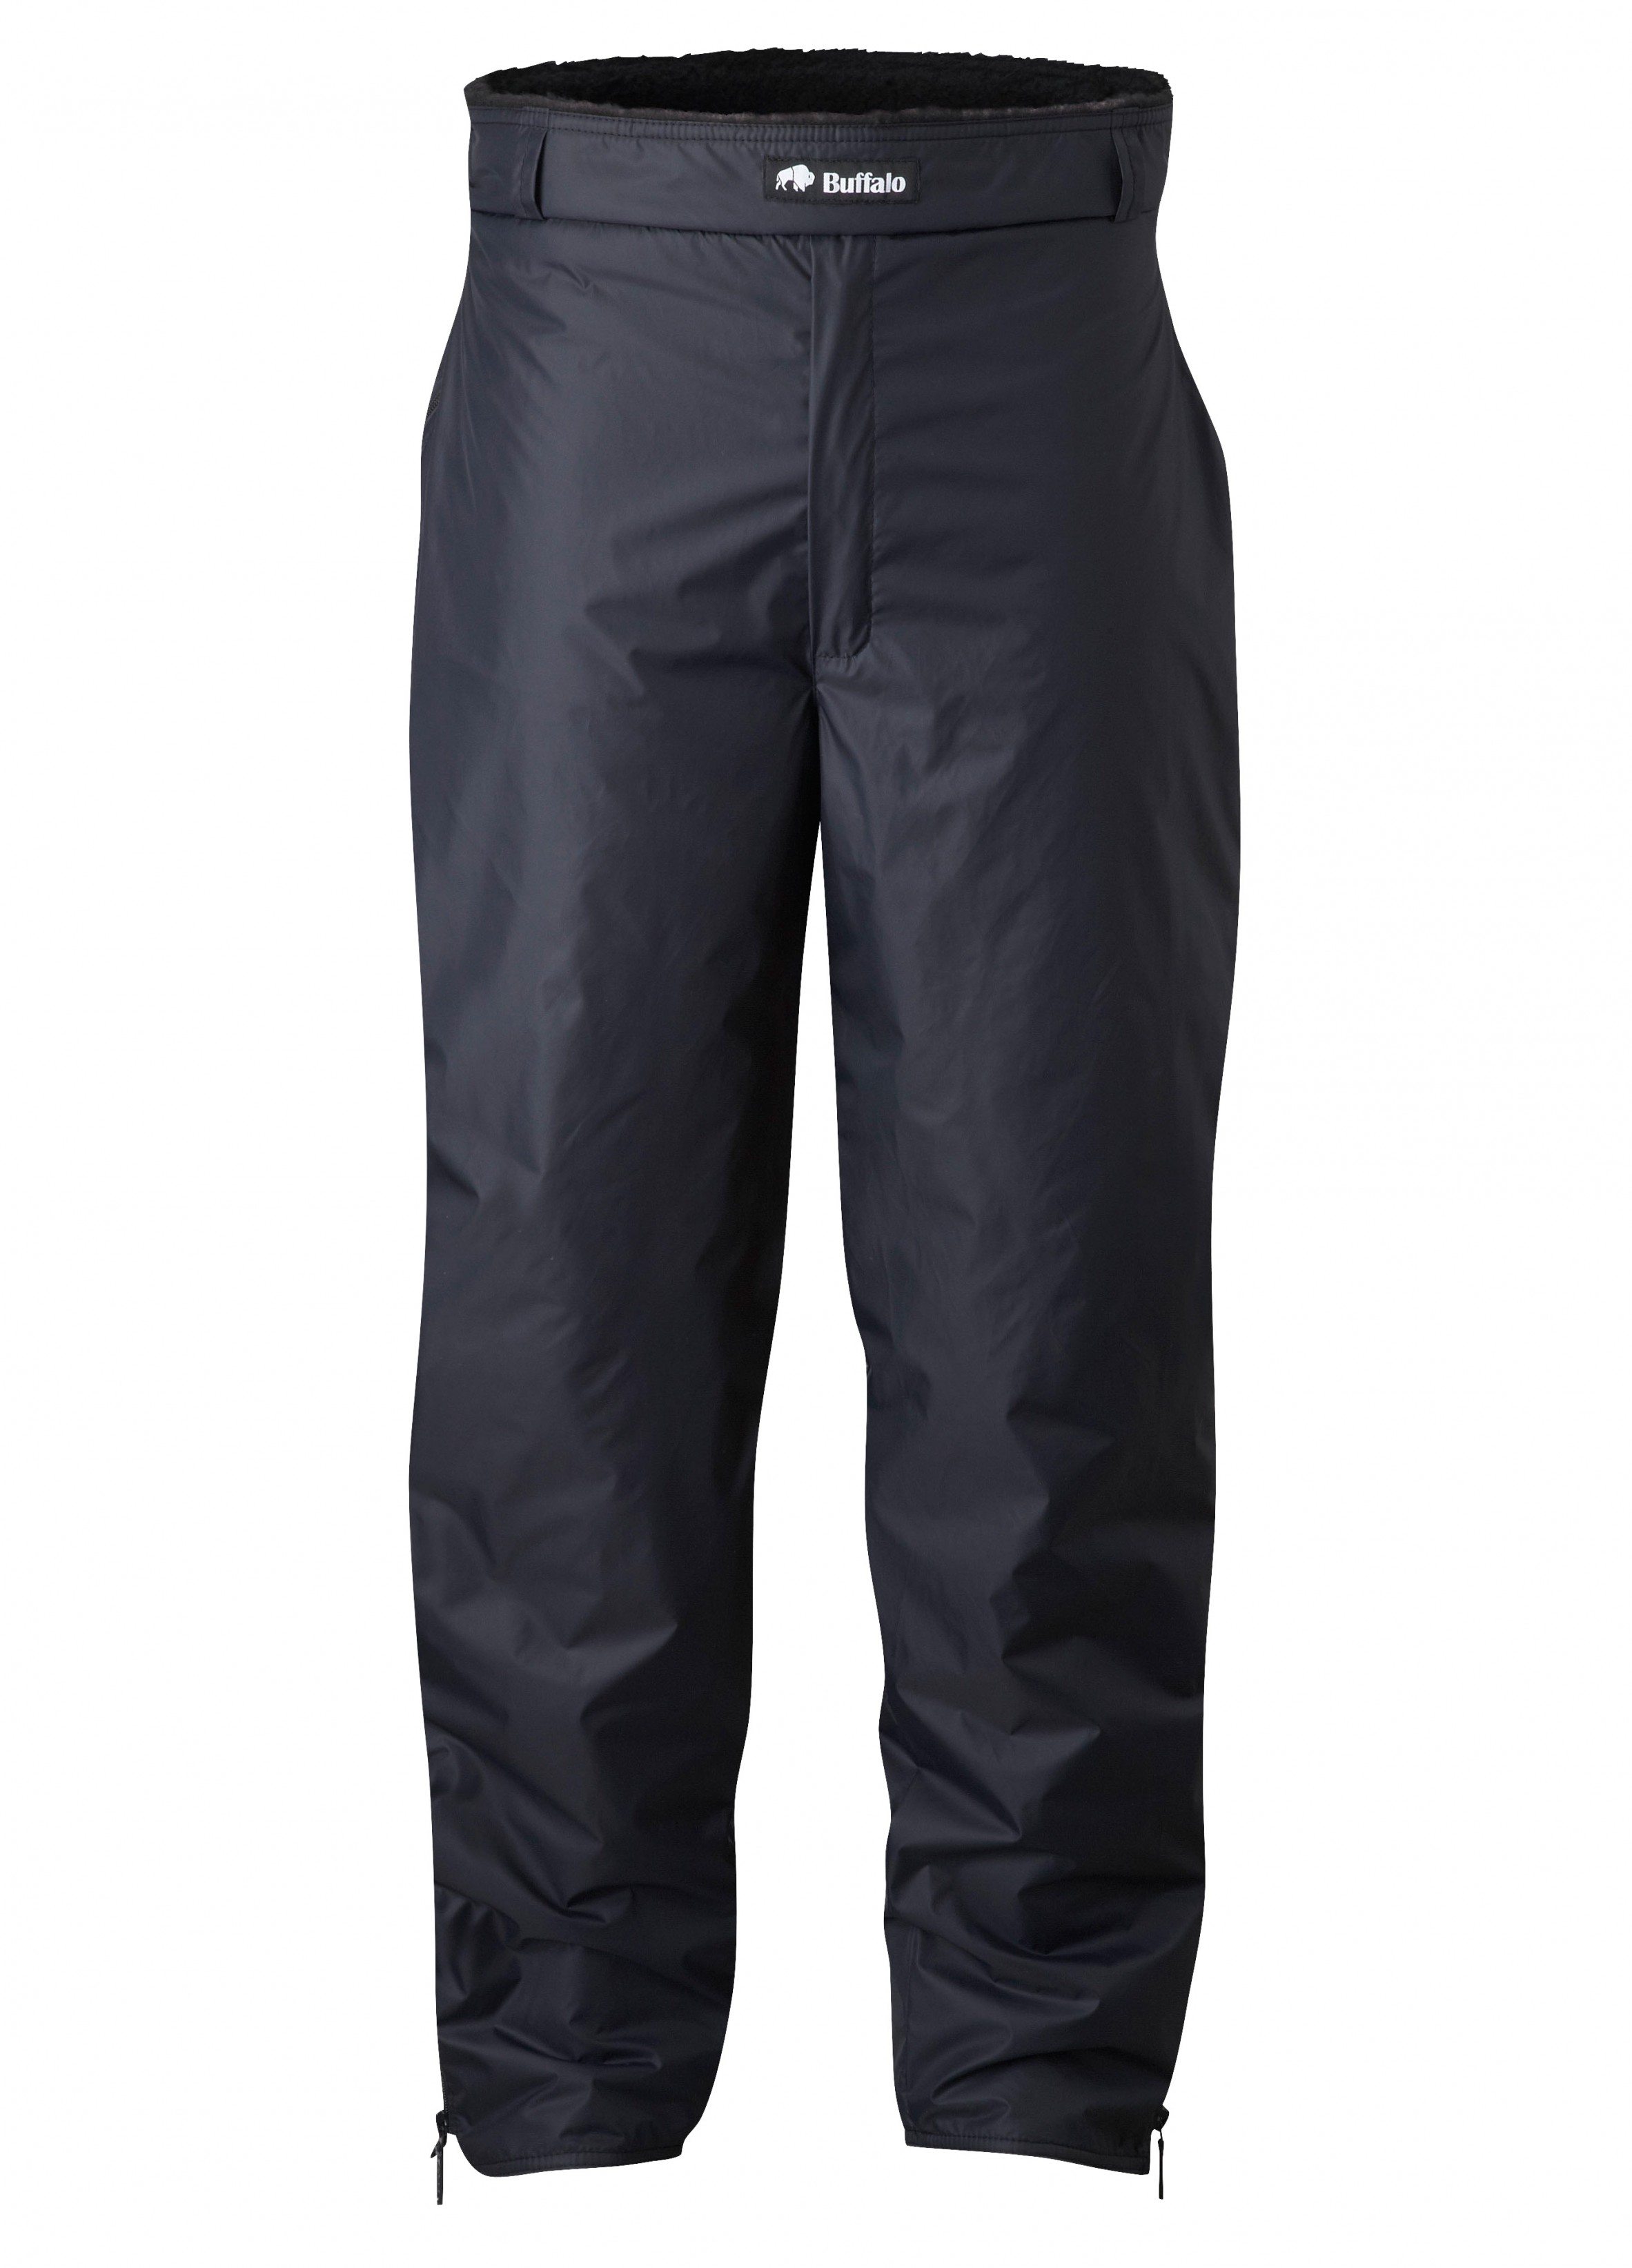 Buffalo Special 6 Trousers Outdoor Pants  AbsoluteSnow